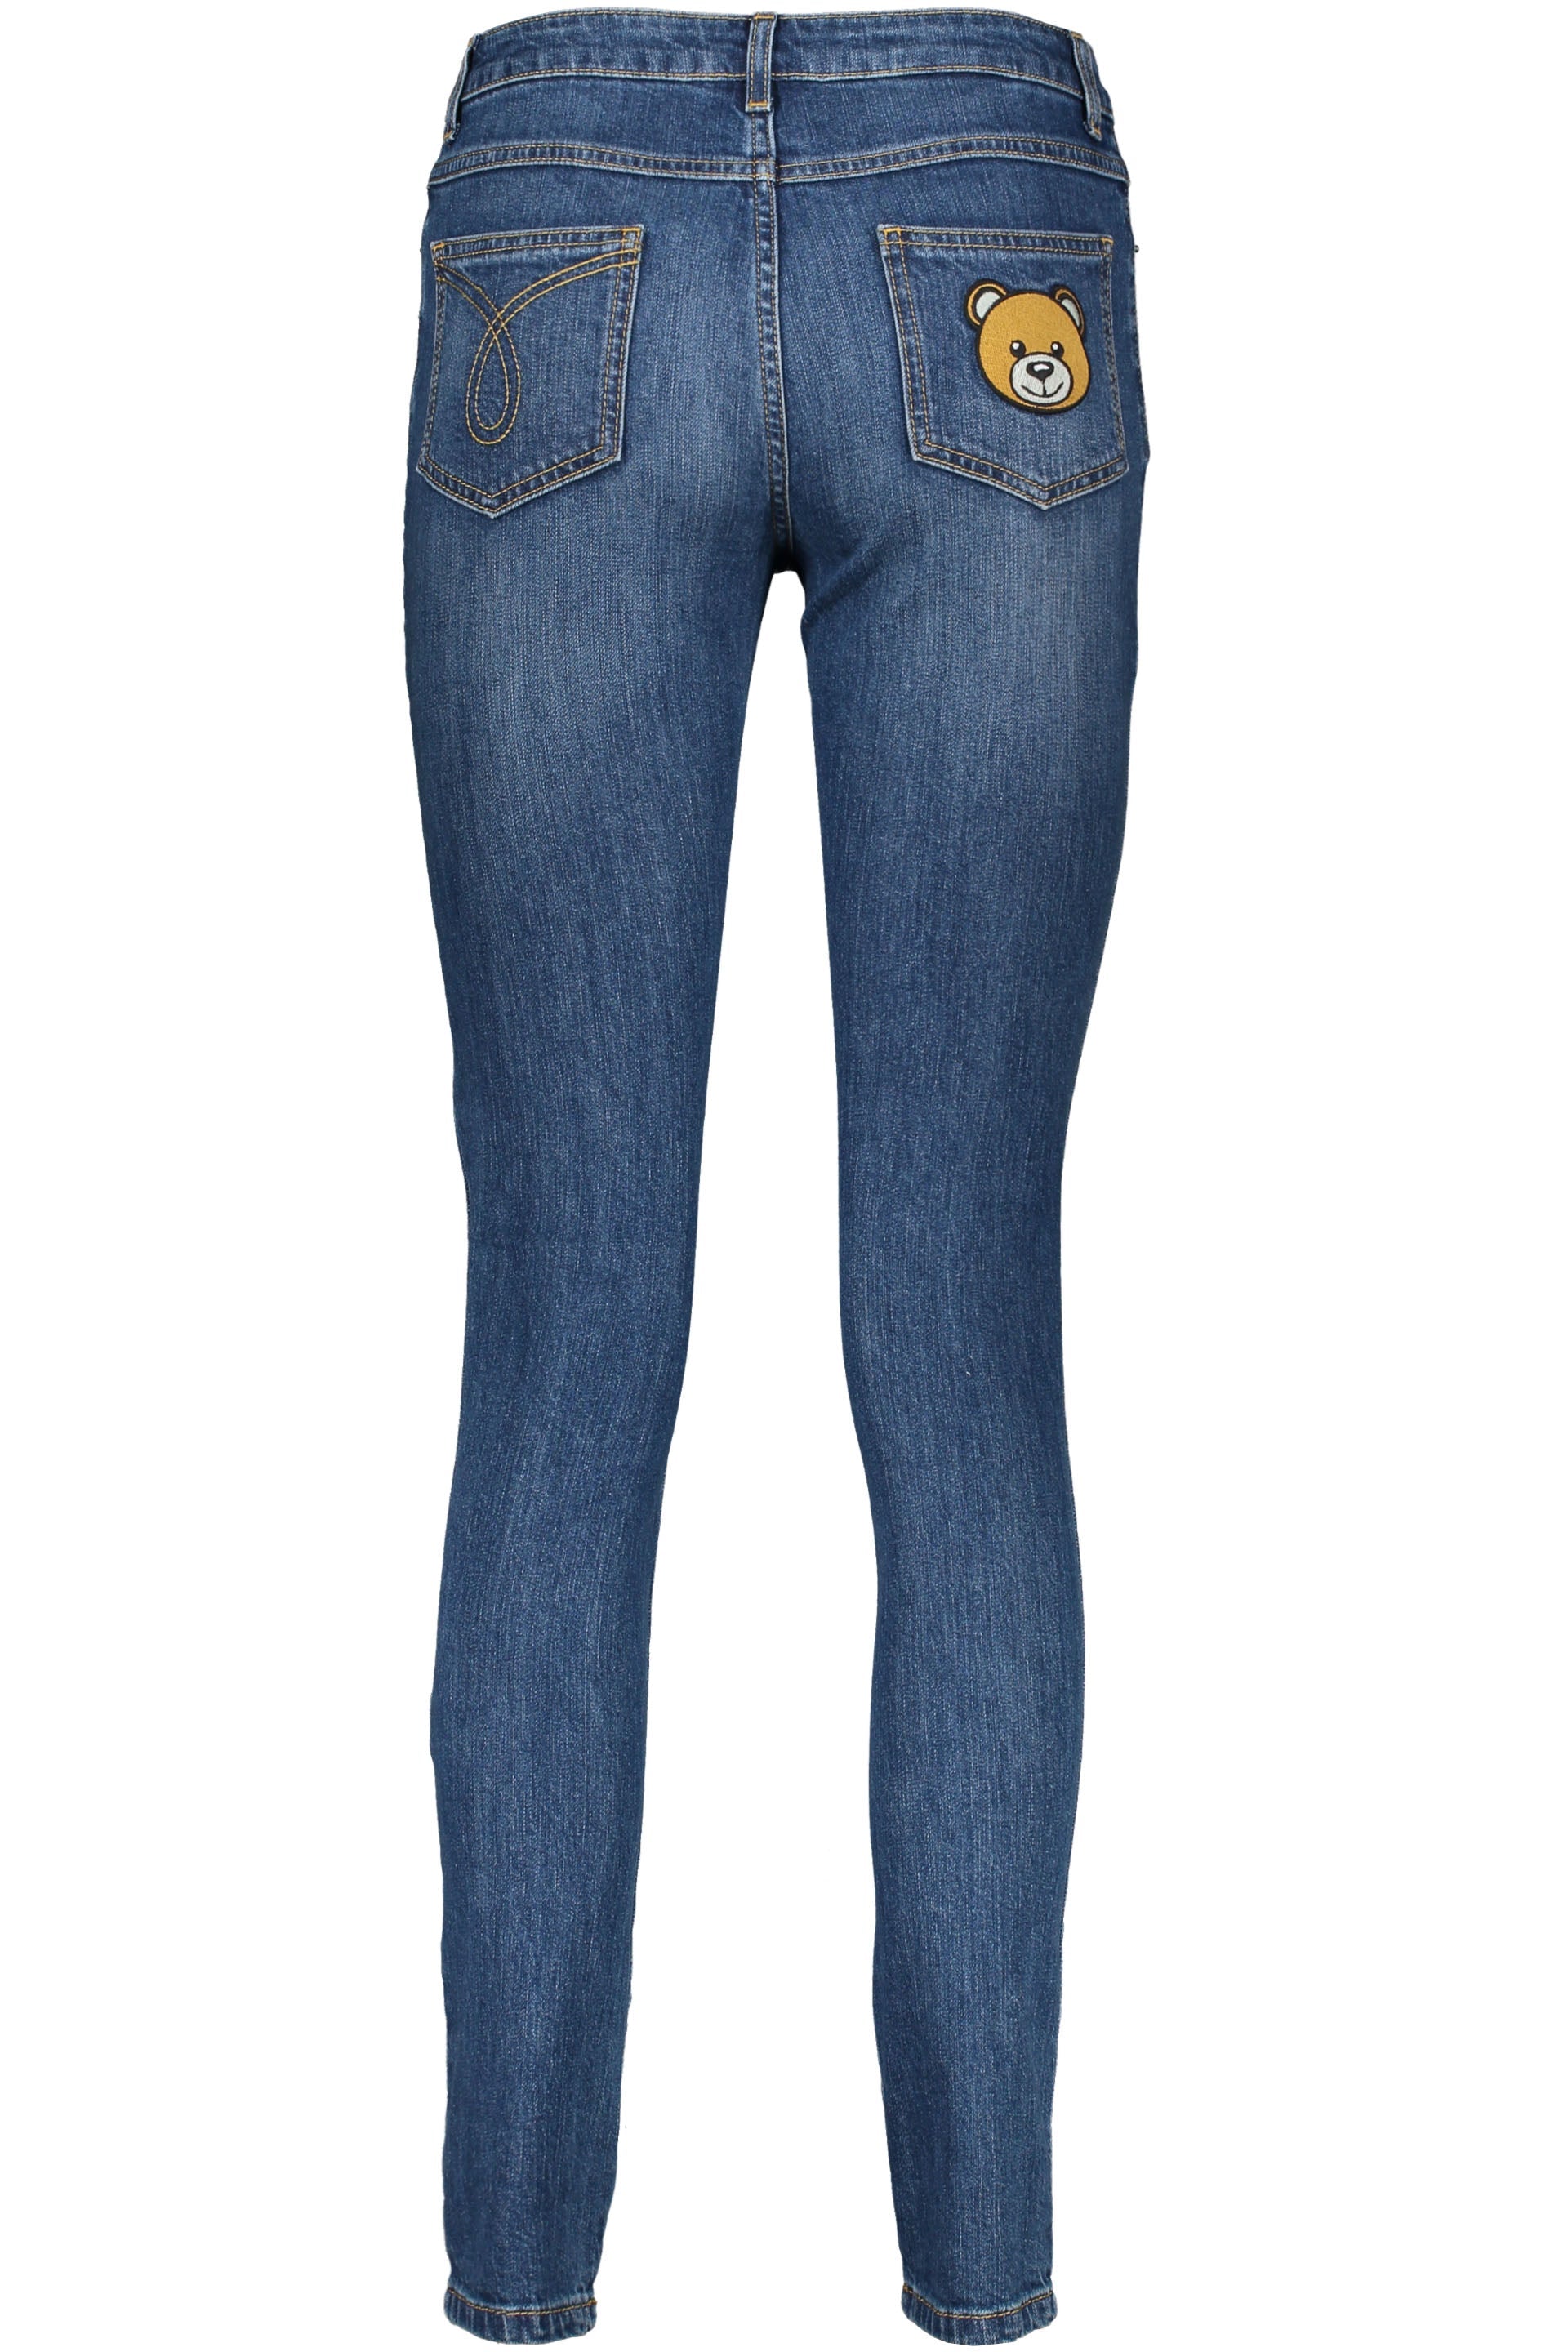 5-pocket skinny jeans-Moschino-OUTLET-SALE-ARCHIVIST